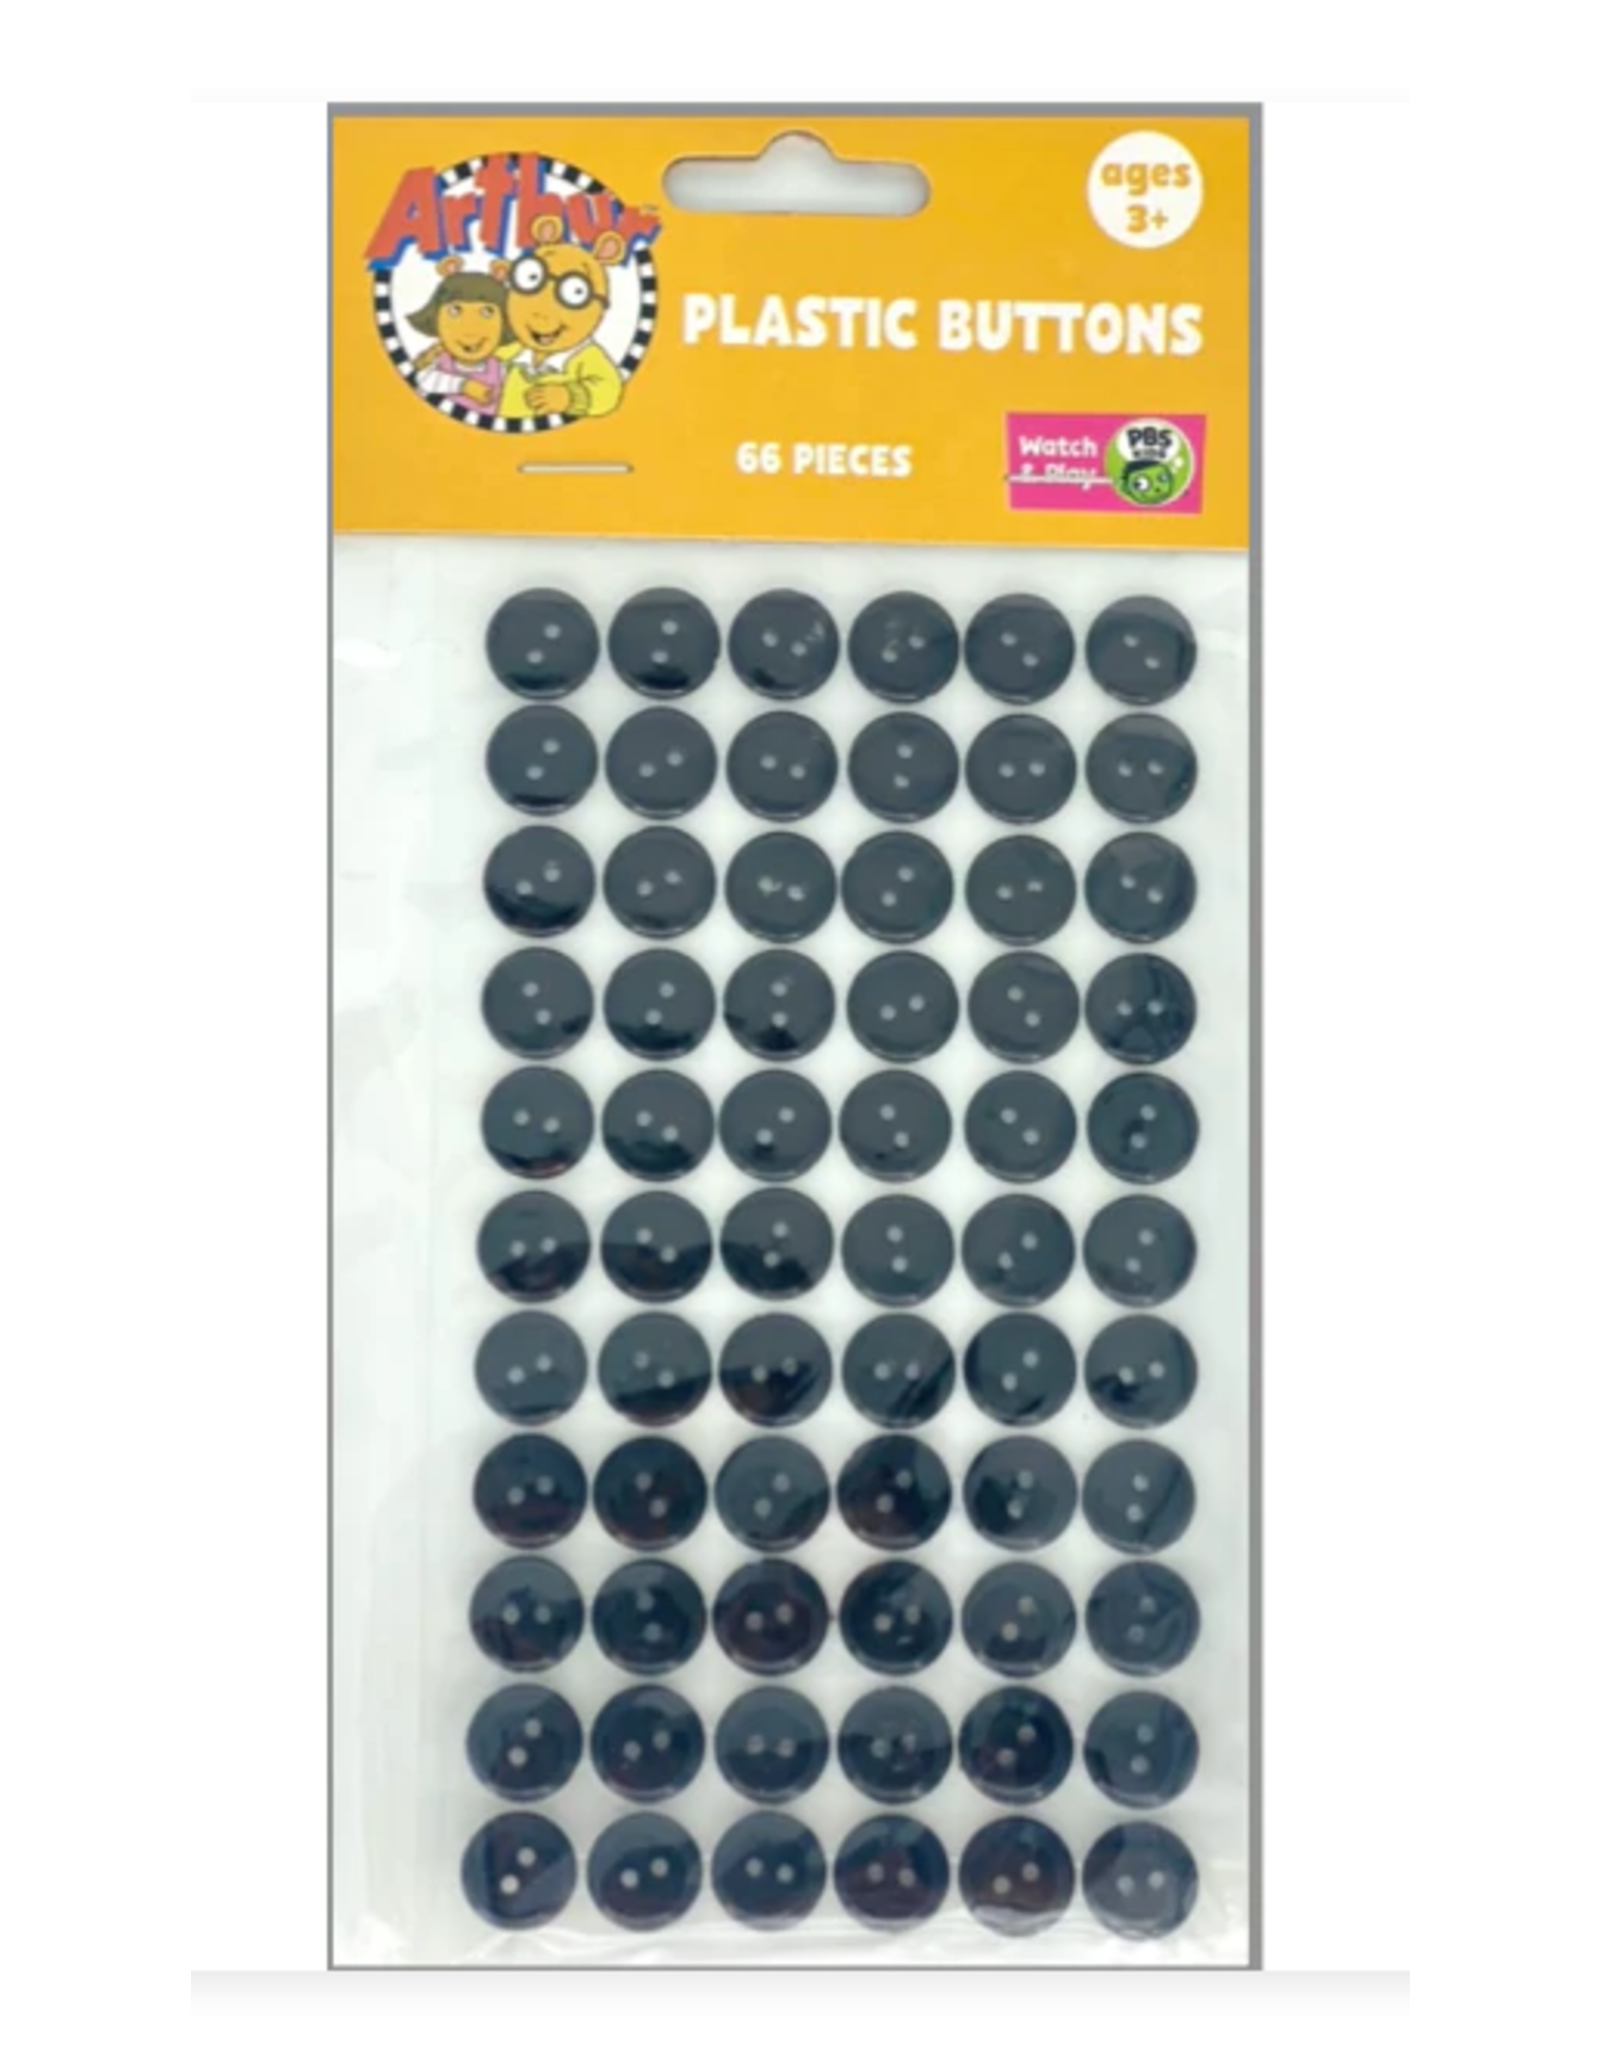 PBS ADHESIVE BUTTONS: BLACK 66PC